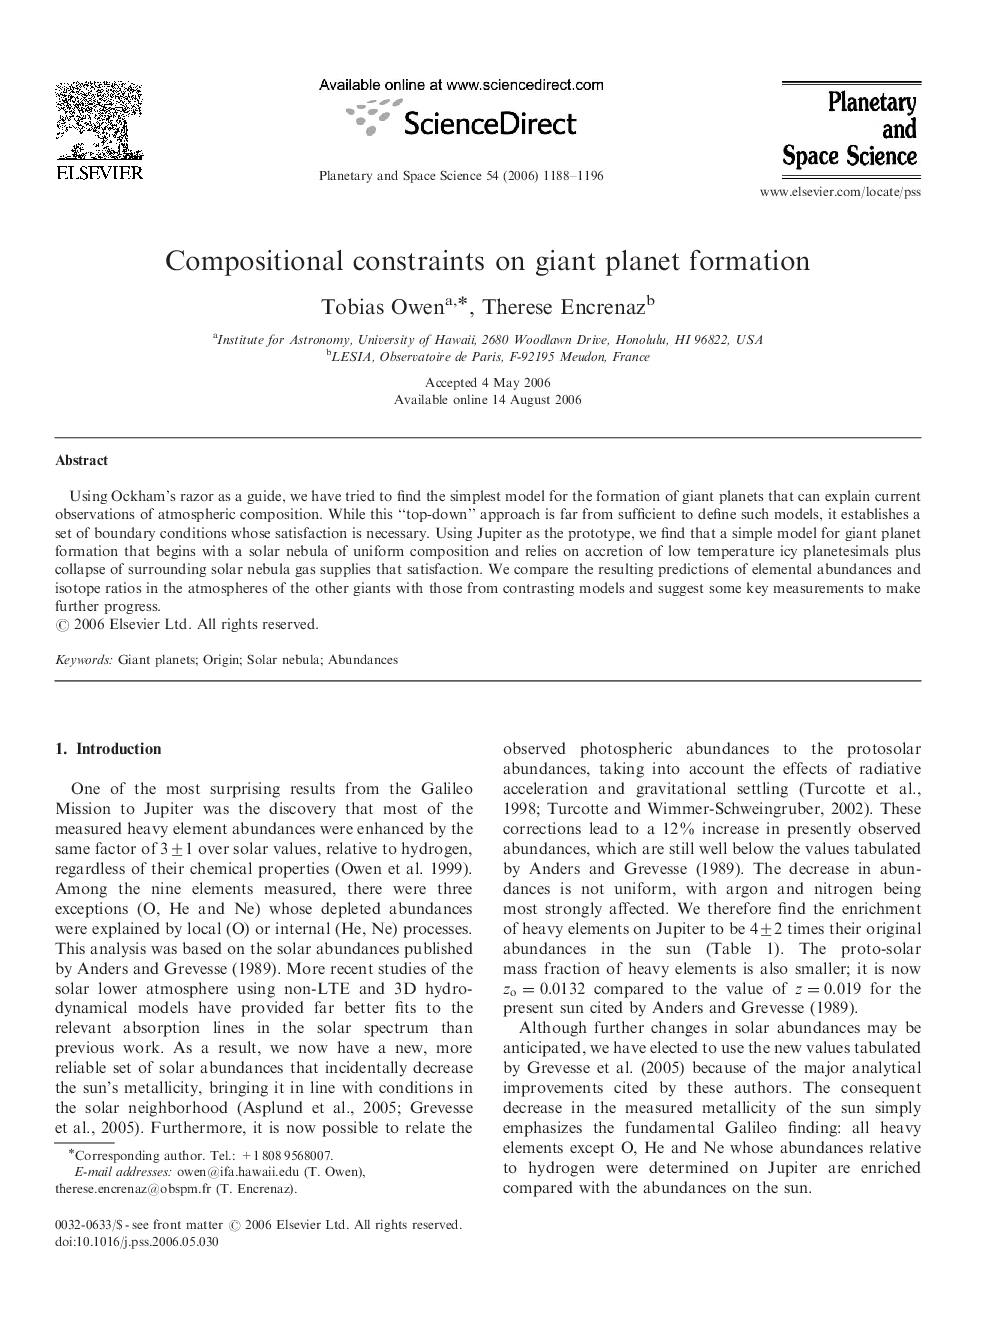 Compositional constraints on giant planet formation